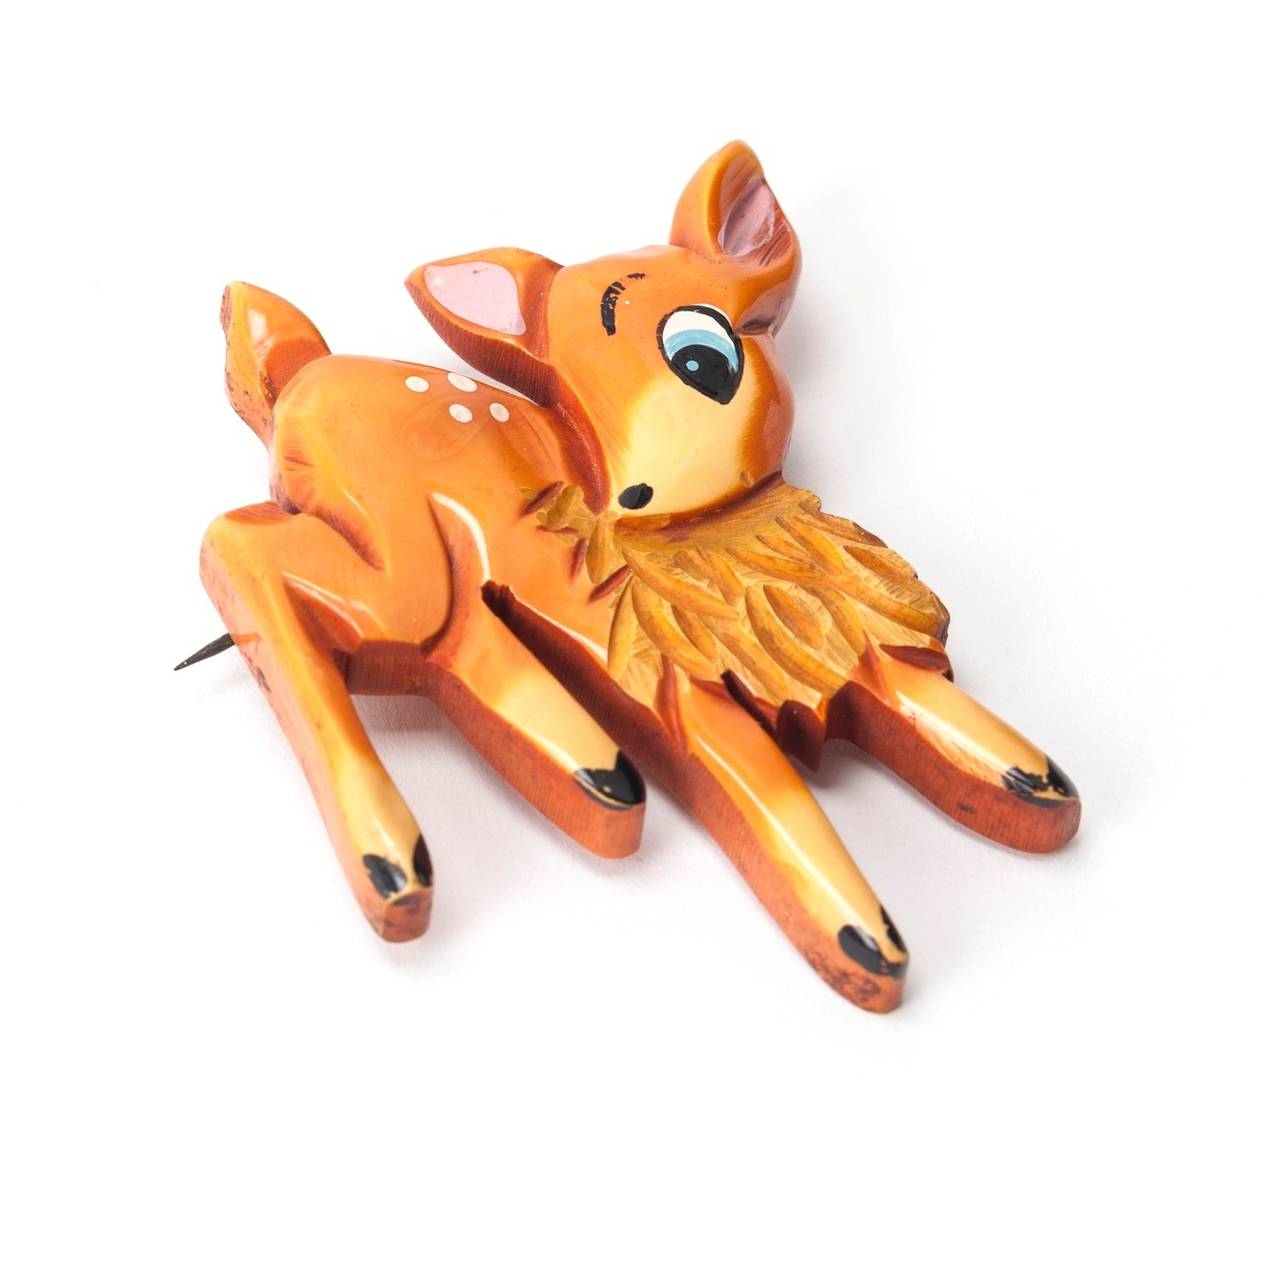 Bakelite Bambi brooch from the 1930's with cold painted enamel accents. Cartoony and Disney-esque...Classic American Folk Art. 1930's USA.
Excellent condition.